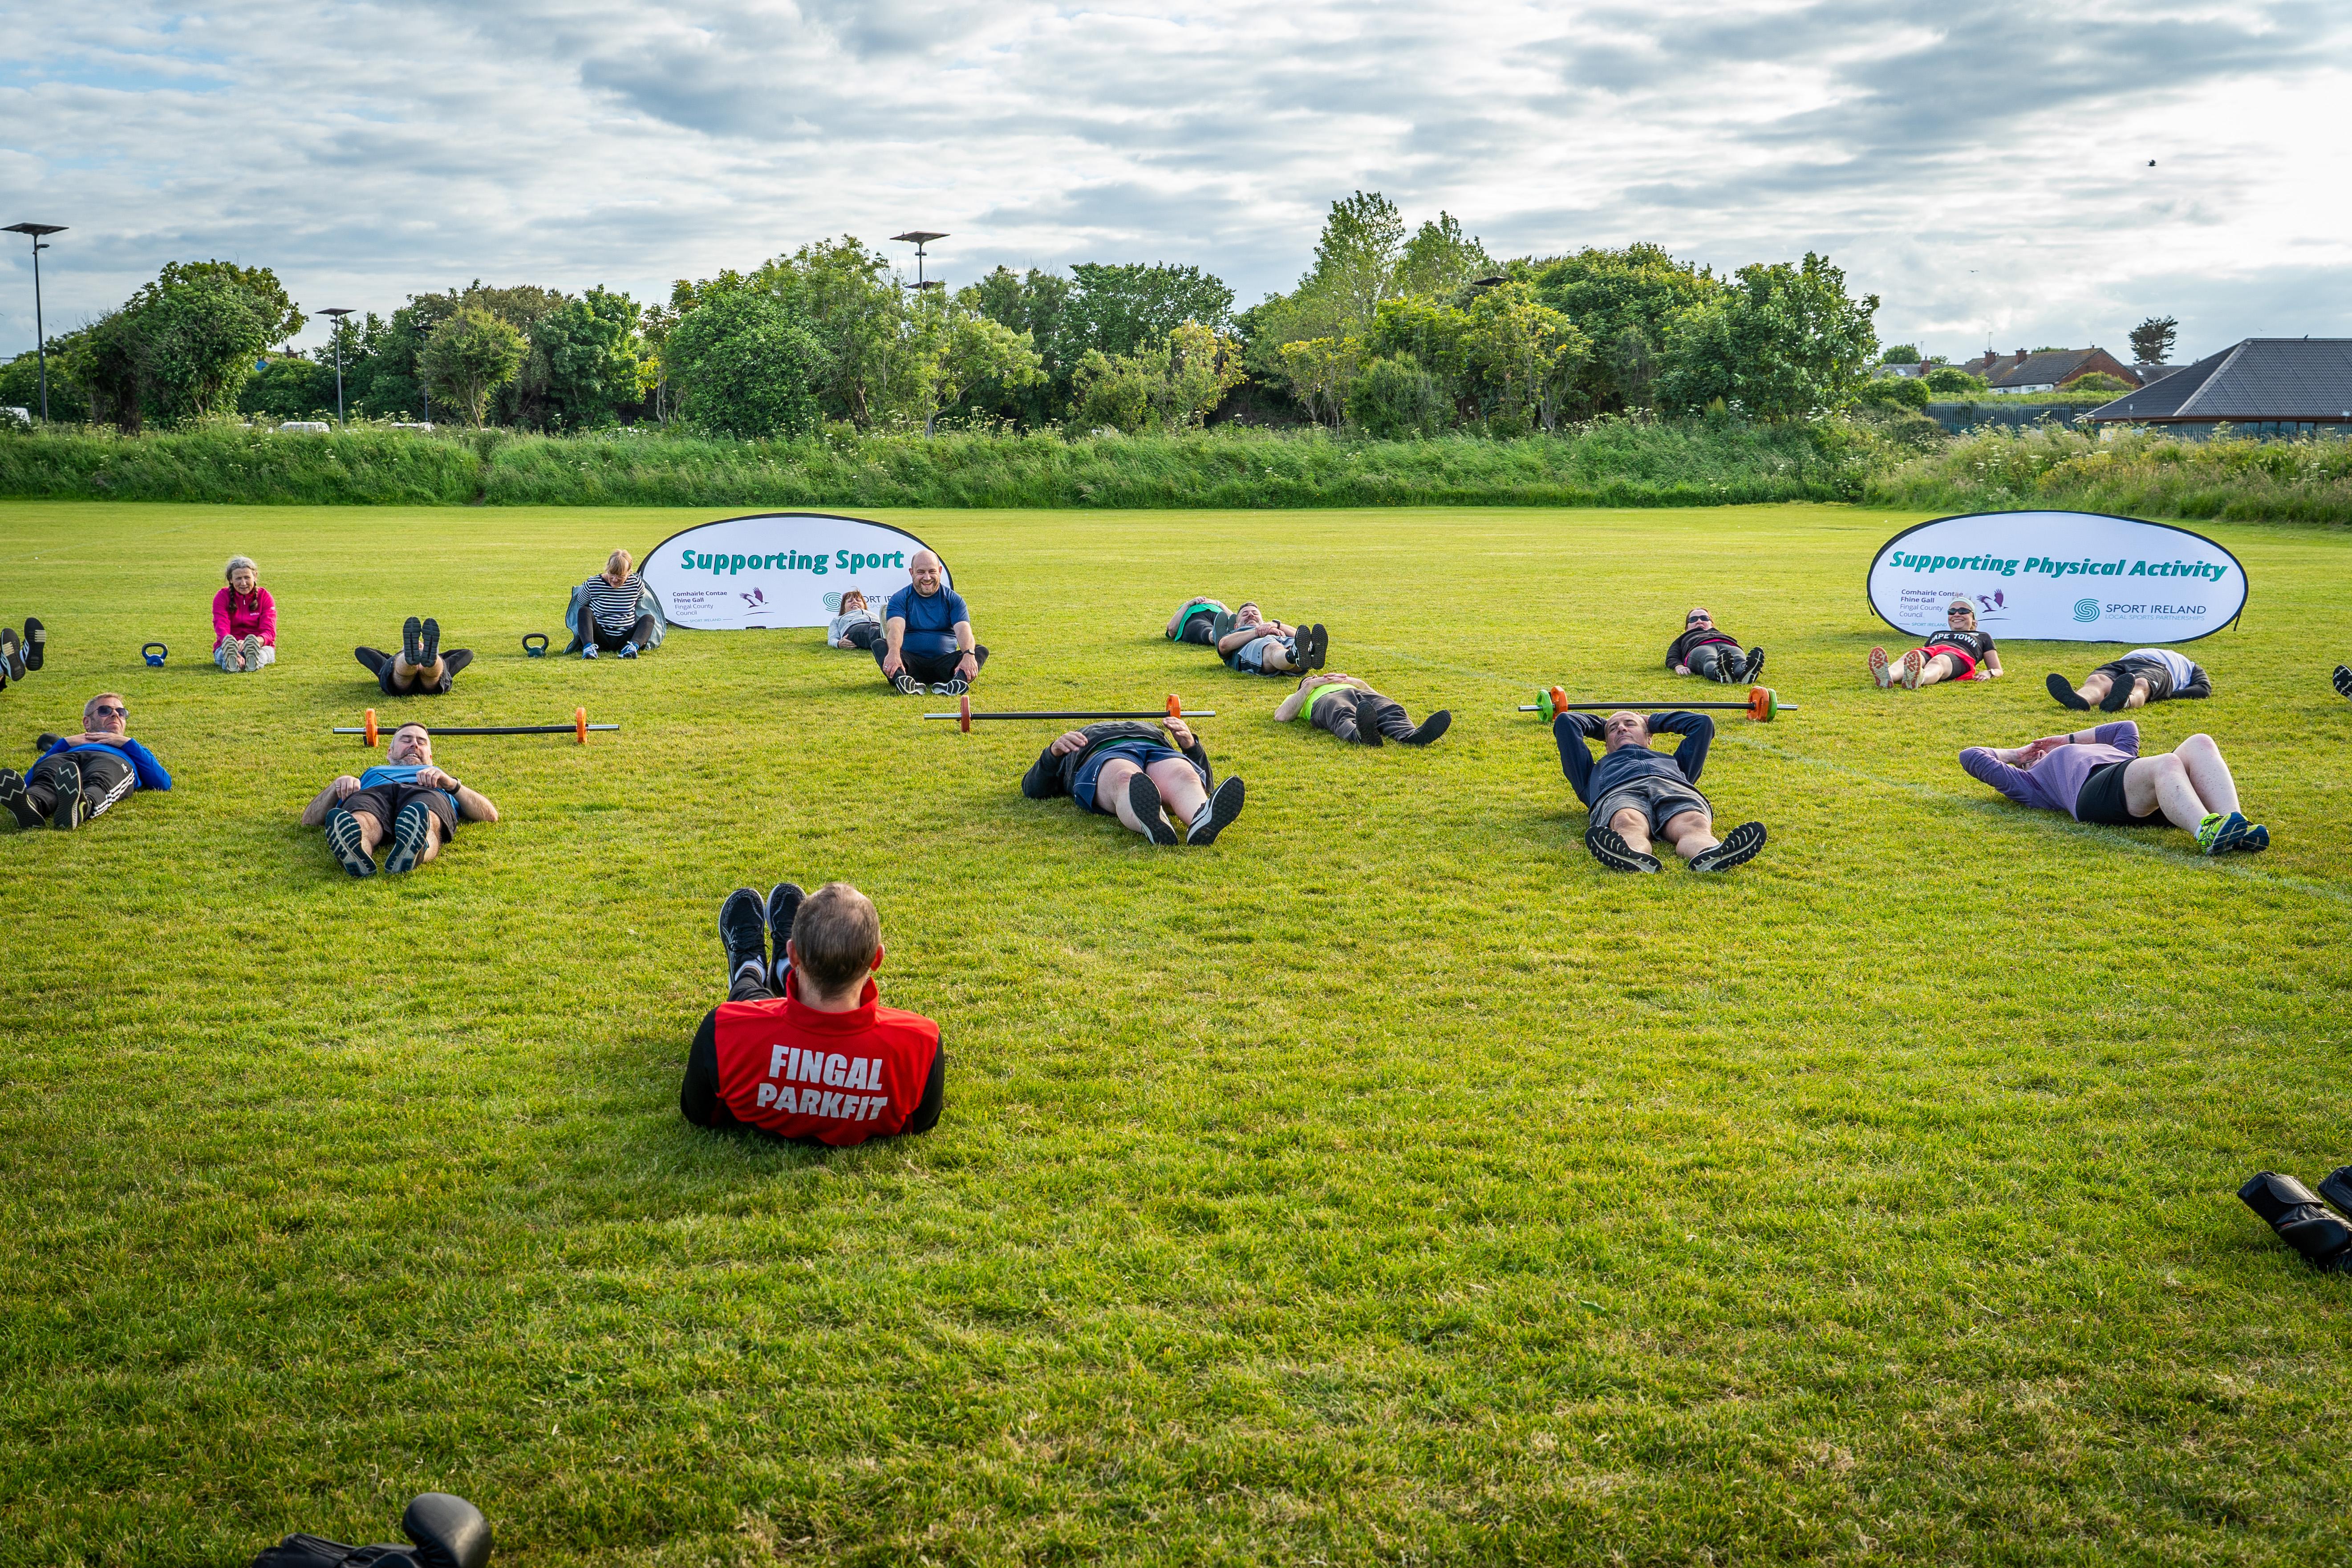 Get fit with Fingal's free workout sessions in the great outdoors